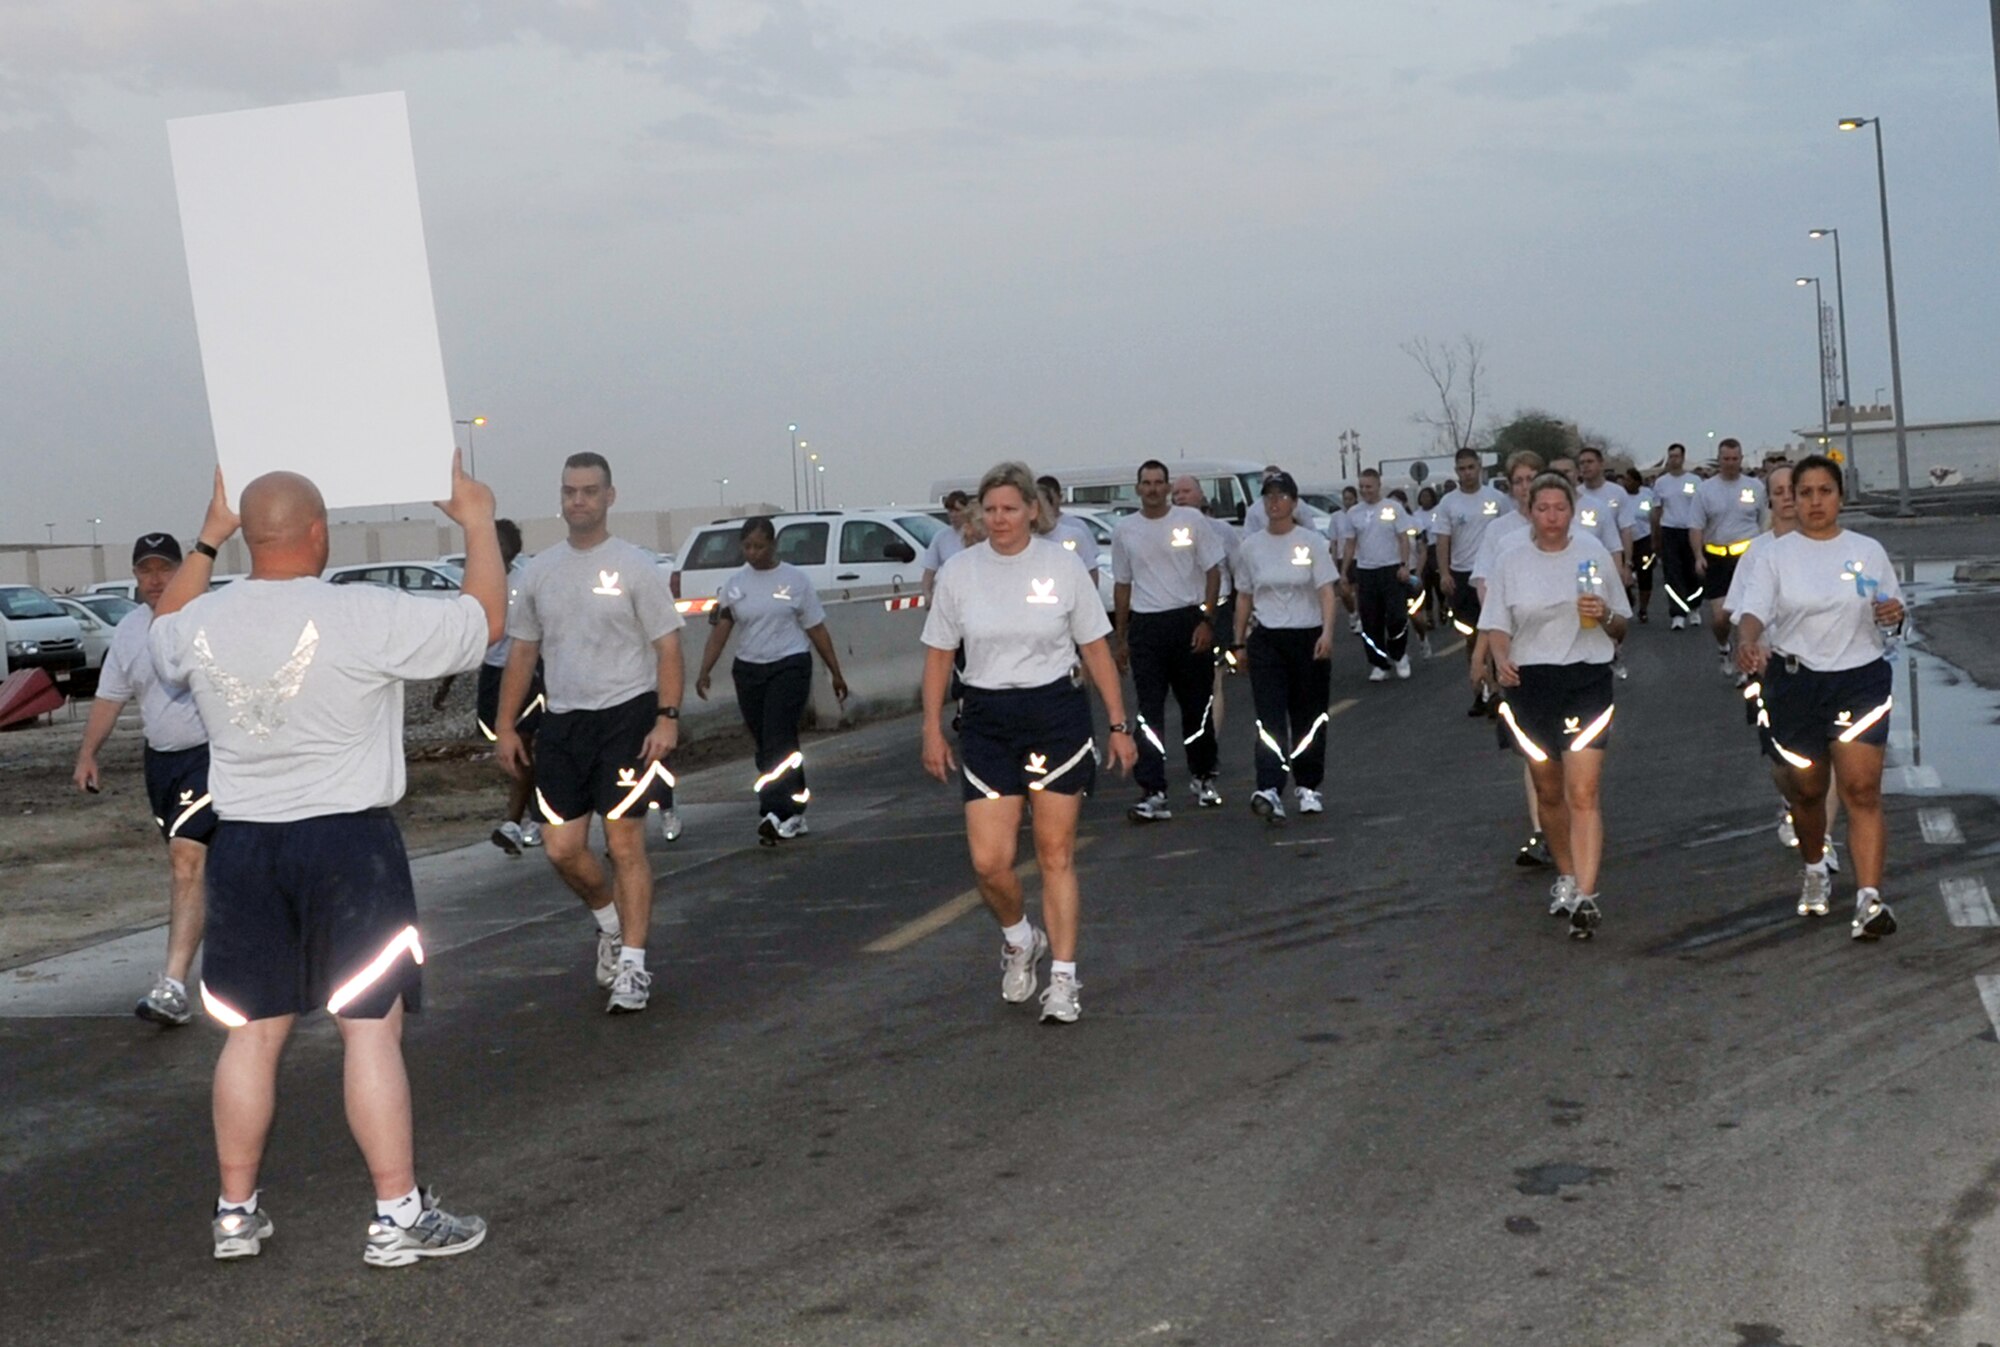 Airmen from the 380th Air Expeditionary Wing participate in the "Walk A Mile In Their Shoes" event by the 380th Air Expeditionary Wing at a non-disclosed base in Southwest Asia on April, 19, 2010, in observance of Sexual Assault Awareness Month. Throughout a one-mile walk, signs with information on sexual assault were placed while walk participants read them and walked in silence. The event was organized by Capt. Richard Laca -- the 380th AEW sexual assault response coordinator. (U.S. Air Force Photo/Master Sgt. Scott T. Sturkol/Released)